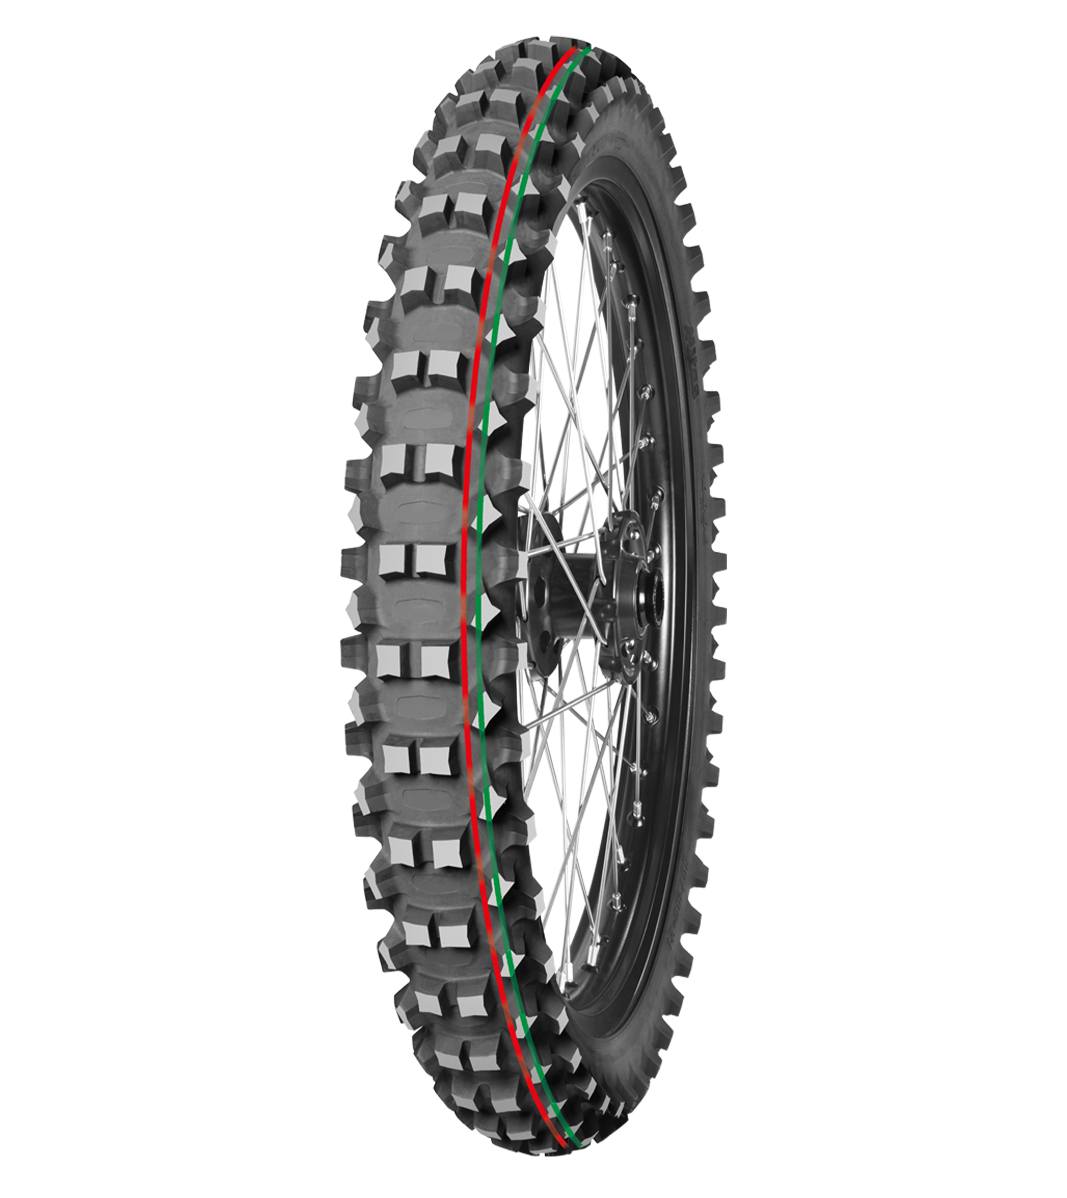 Mitas TERRA FORCE-MX MH 60/100-12 Motocross Competition Off-Road MEDIUM TO HARD 36J Red &amp; Green Tube Front Tire, 226040, 60/100-12, Front, Motocross, Motocross Competition, Off-Road, Terra Force, Terra Force-MX MH, Trail, Tires - Imported and distributed in North &amp; South America by Lindeco Genuine Powersports - Premier Powersports Equipment and Accessories for Motorcycle Enthusiasts, Professional Riders and Dealers.